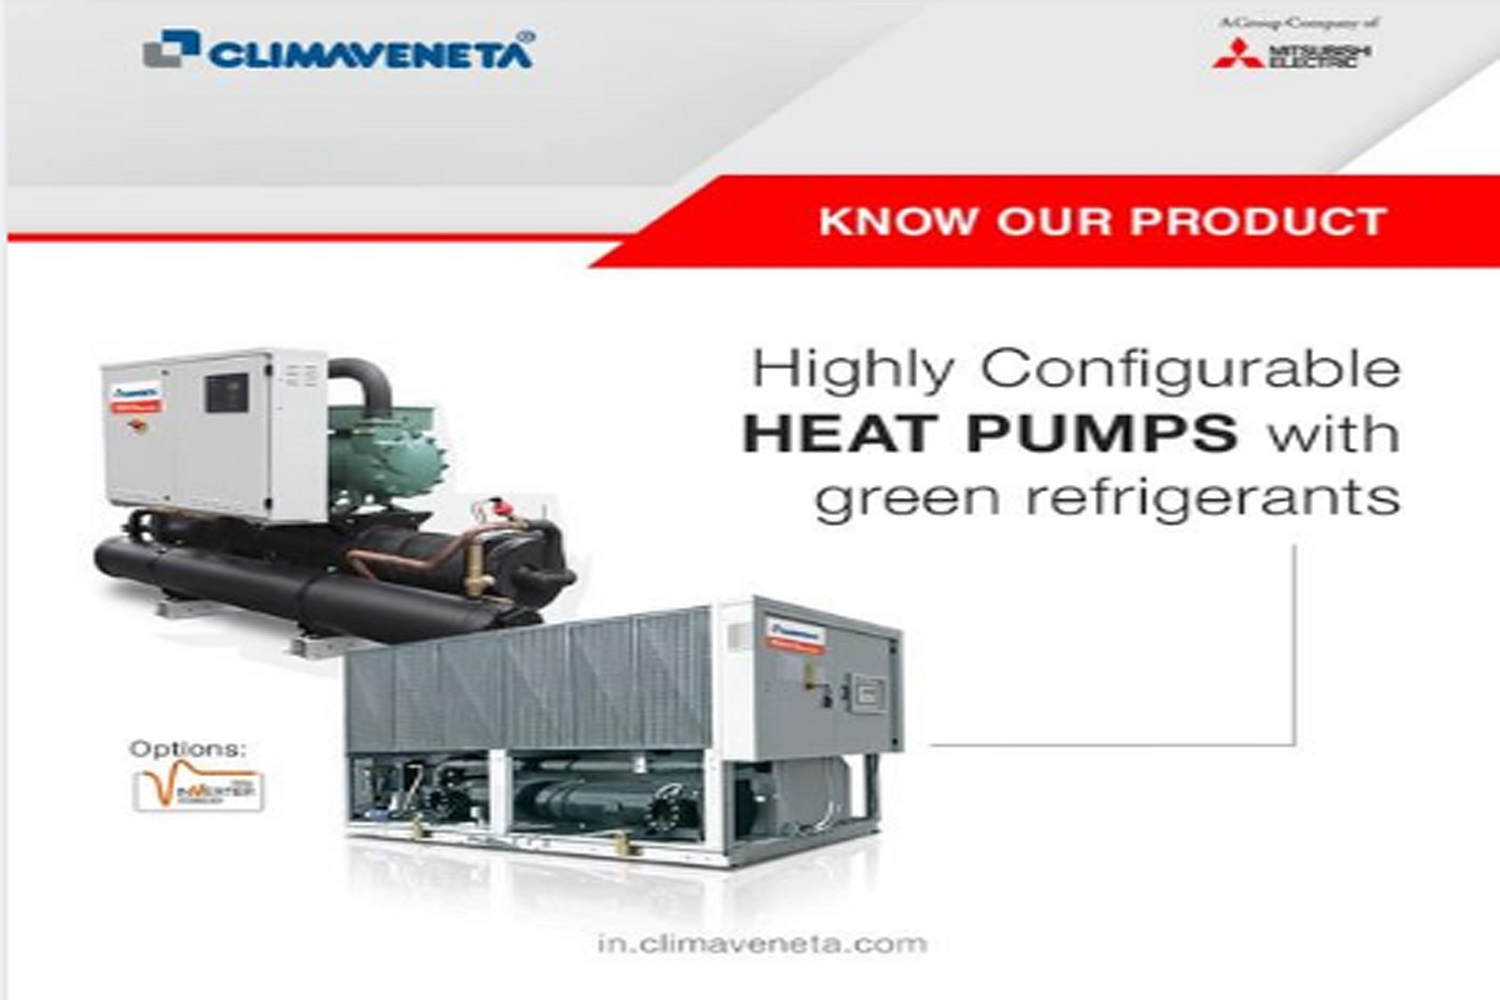 Highly Configurable Heat Pumps with green refrigerants.